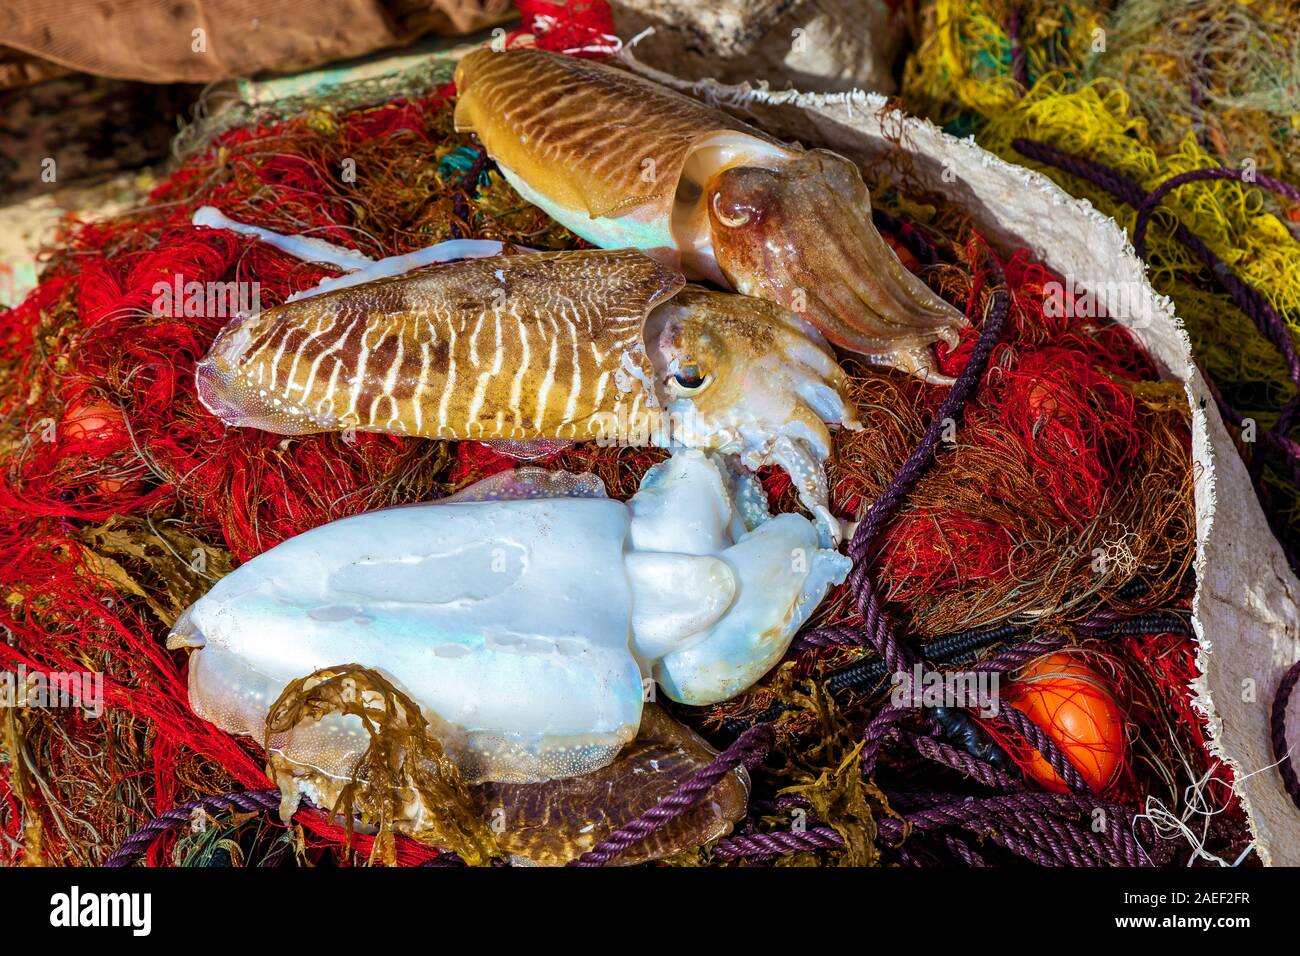 Fresh marine mollusks white and brown colors were caught by fishermen. Cuttlefishes are lying on a pile of red fishing nets. Stock Photo